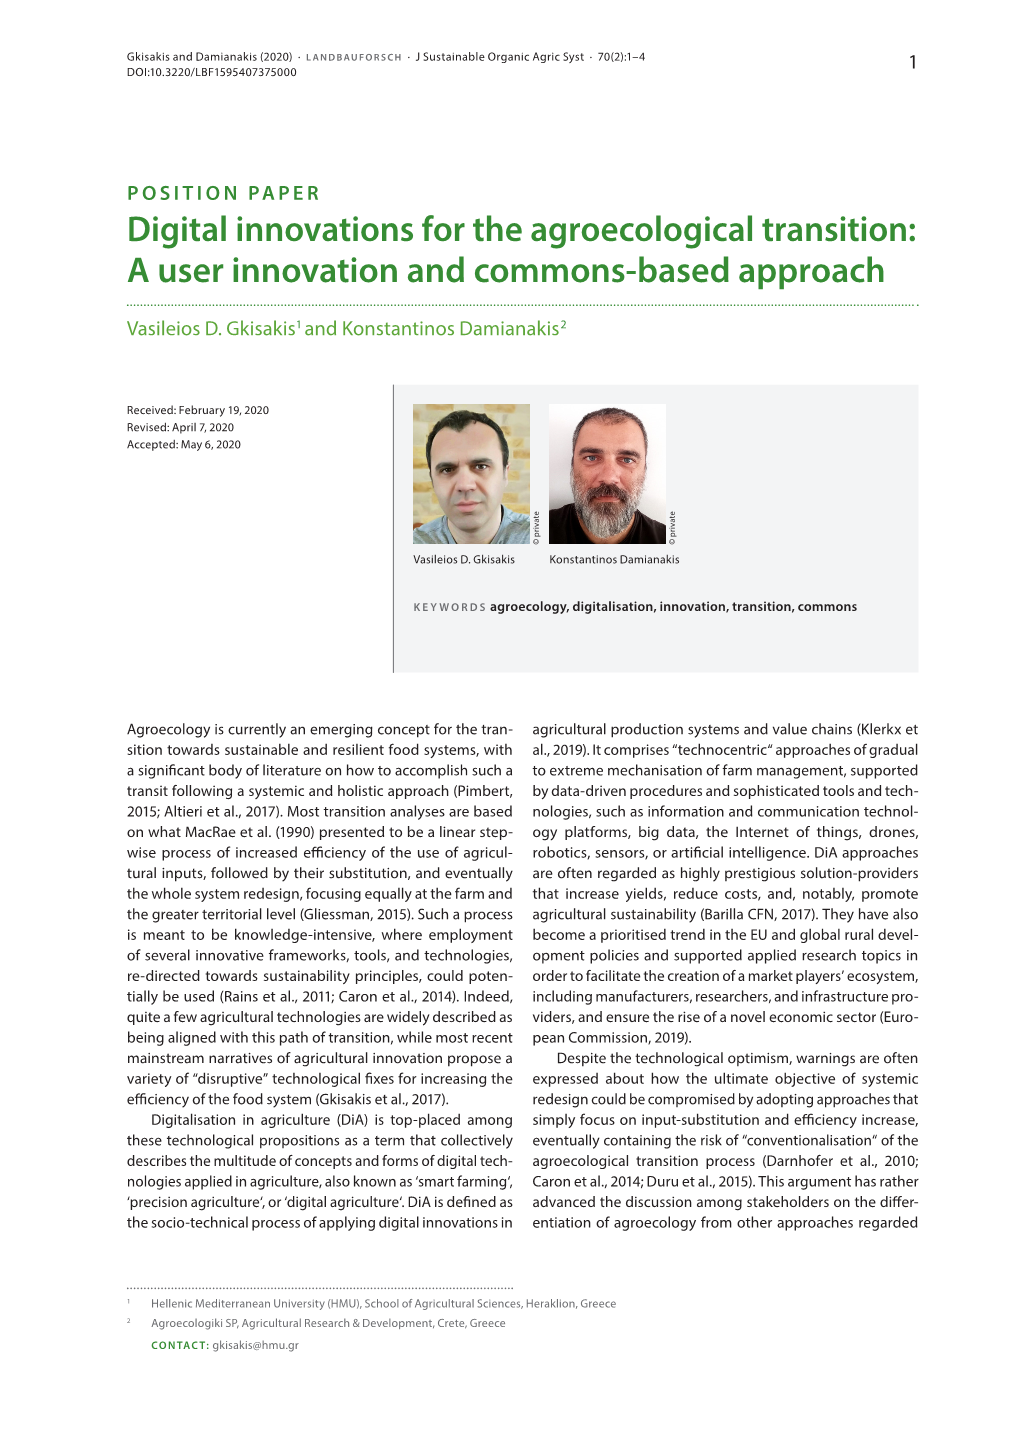 Digital Innovations for the Agroecological Transition: a User Innovation and Commons-Based Approach